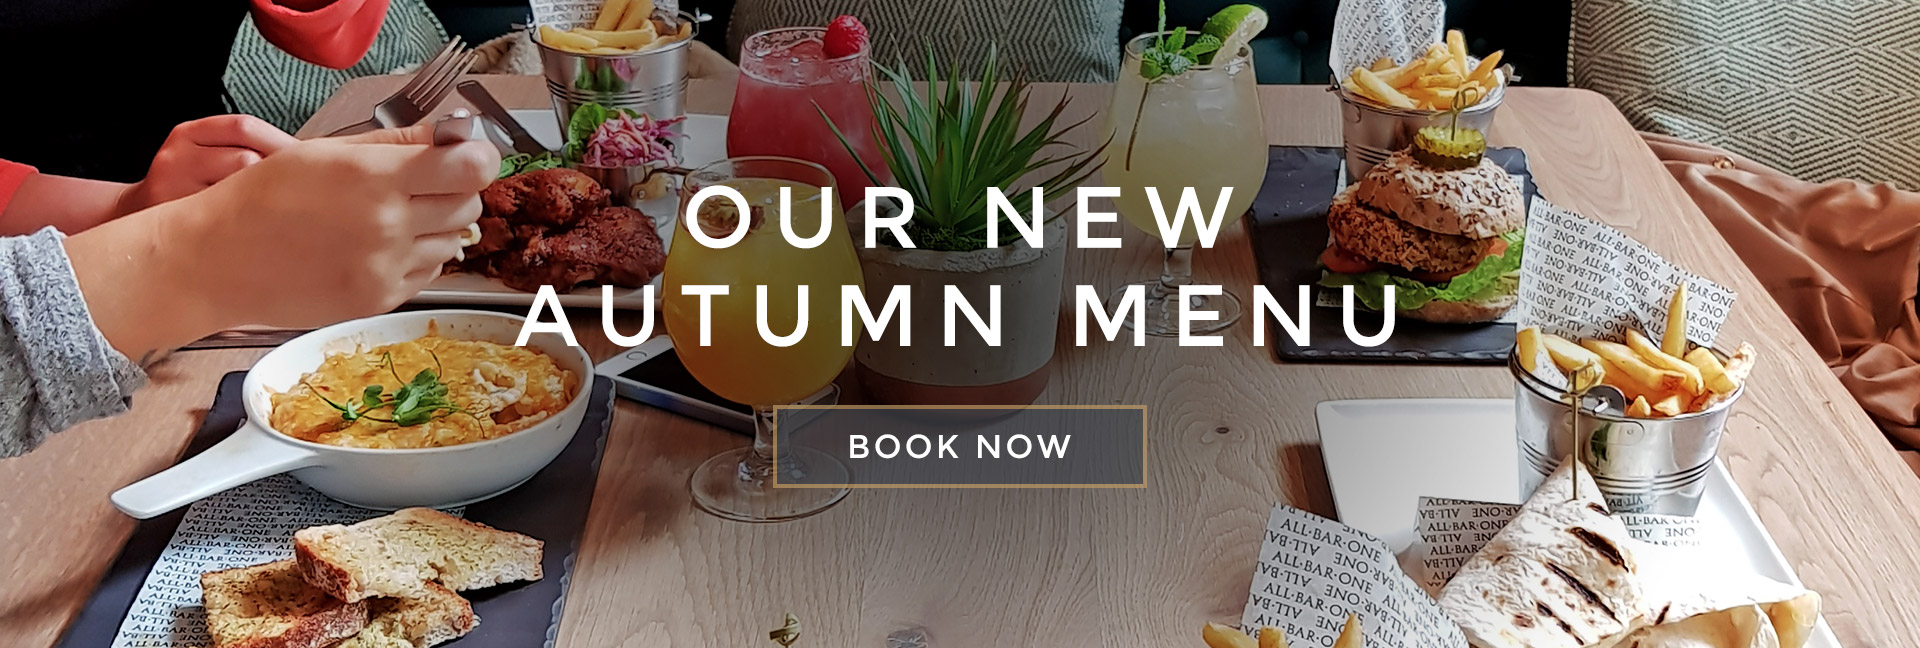 Our new Autumn menu at All Bar One Sheffield - Book now